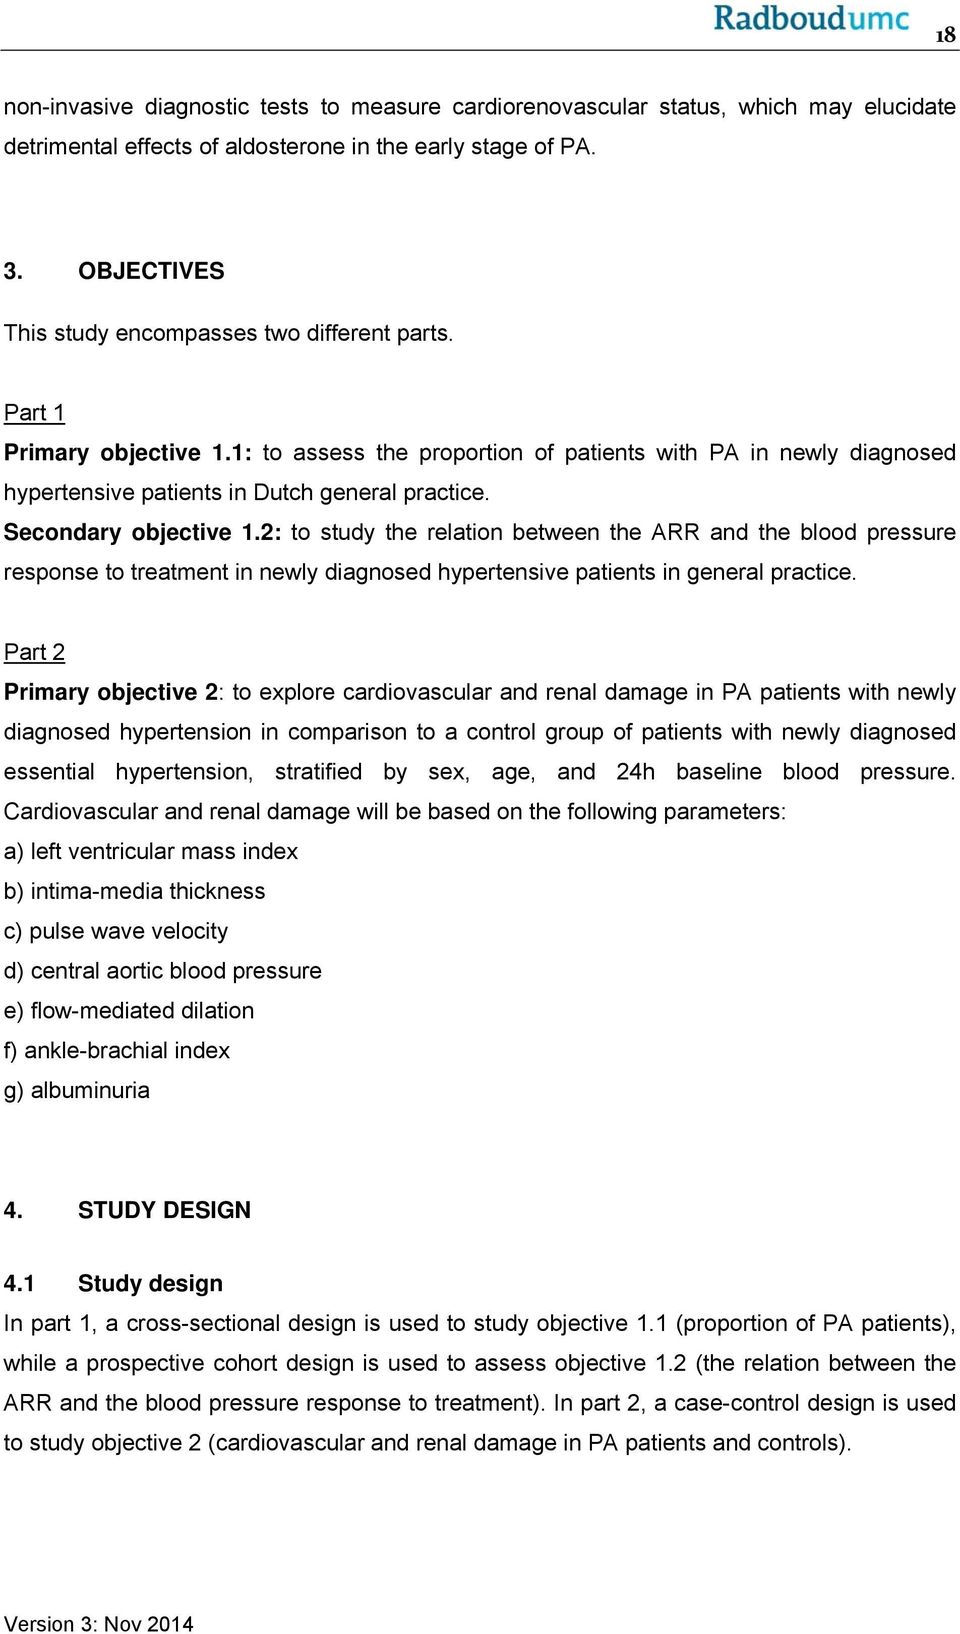 Secondary objective 1.2: to study the relation between the ARR and the blood pressure response to treatment in newly diagnosed hypertensive patients in general practice.